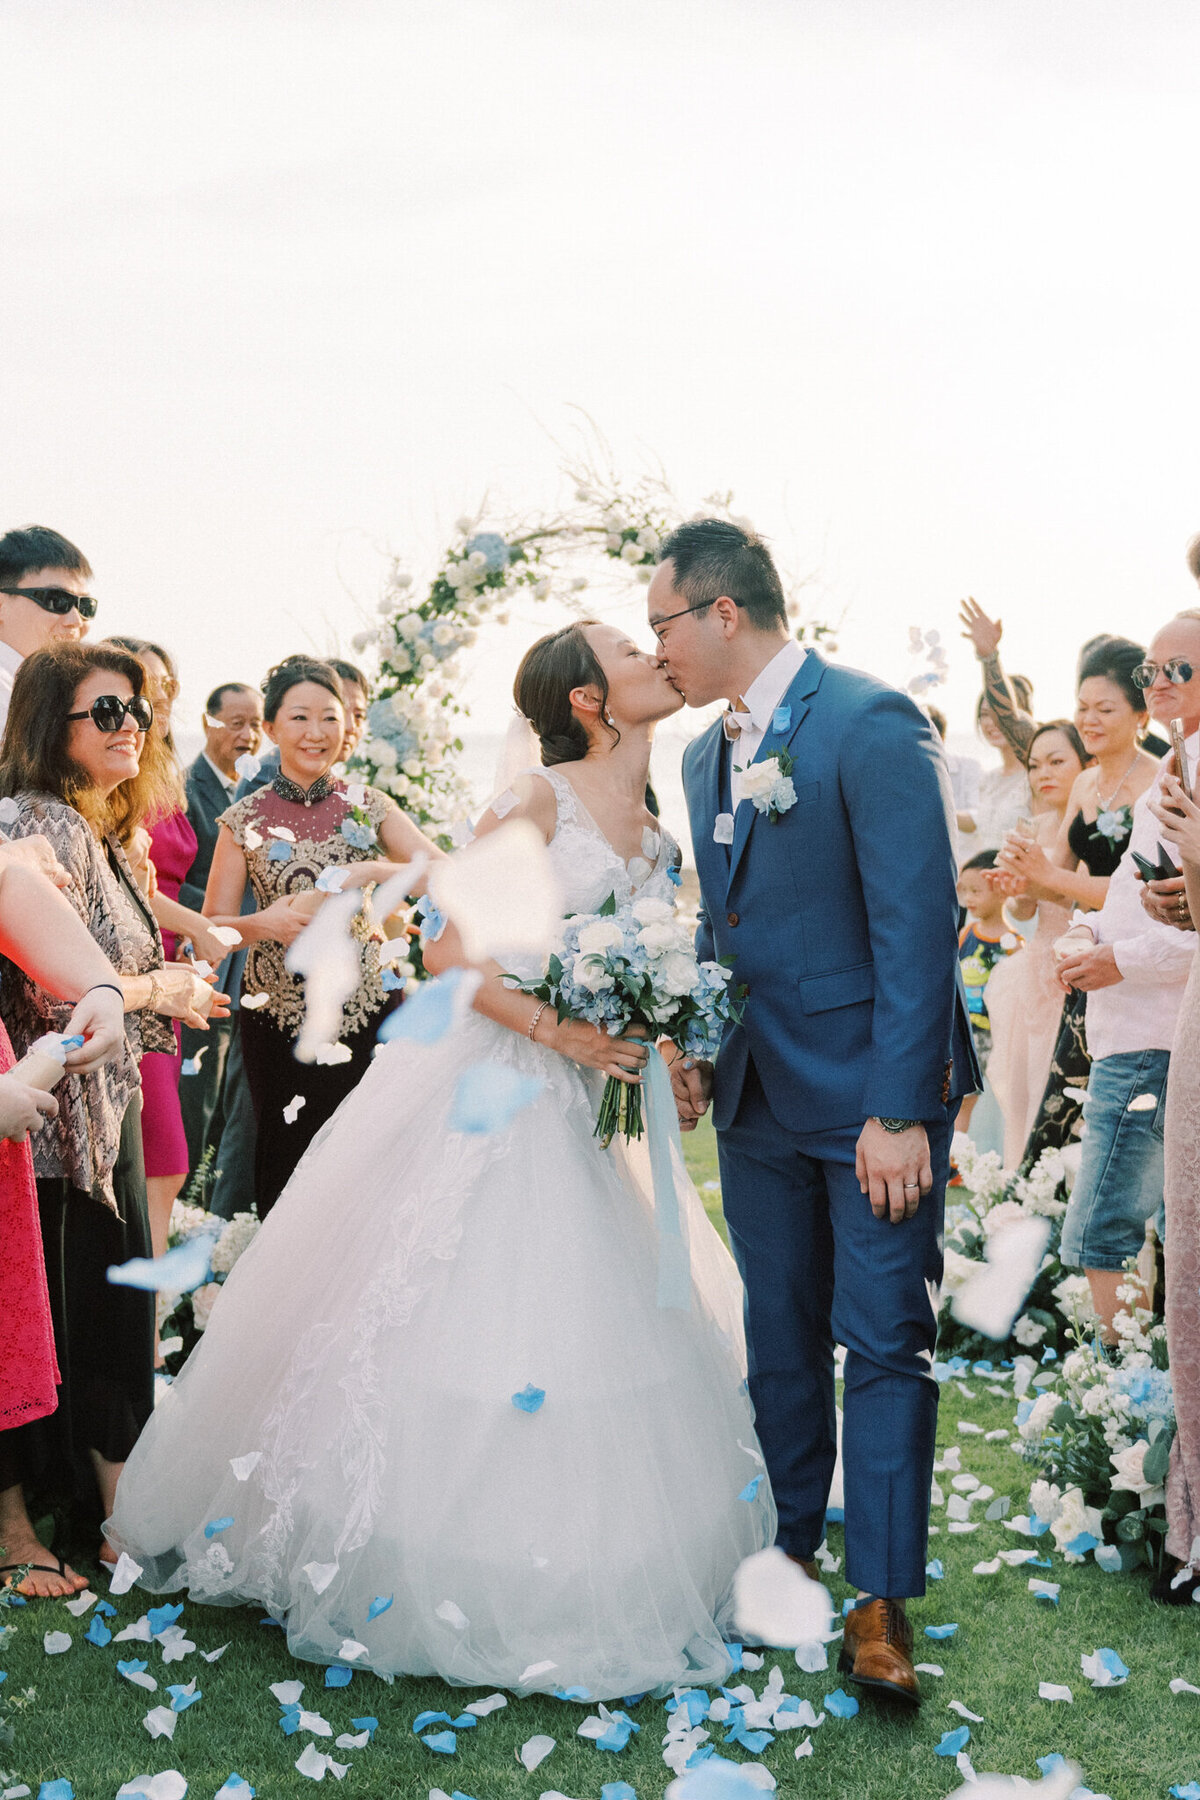 Bride and groom kiss while guests throw blue and white flower petals captured by Pam Kriangkum Photography, fine art, classic wedding photographer in Edmonton, Alberta. Featured on the Bronte Bride Vendor Guide.